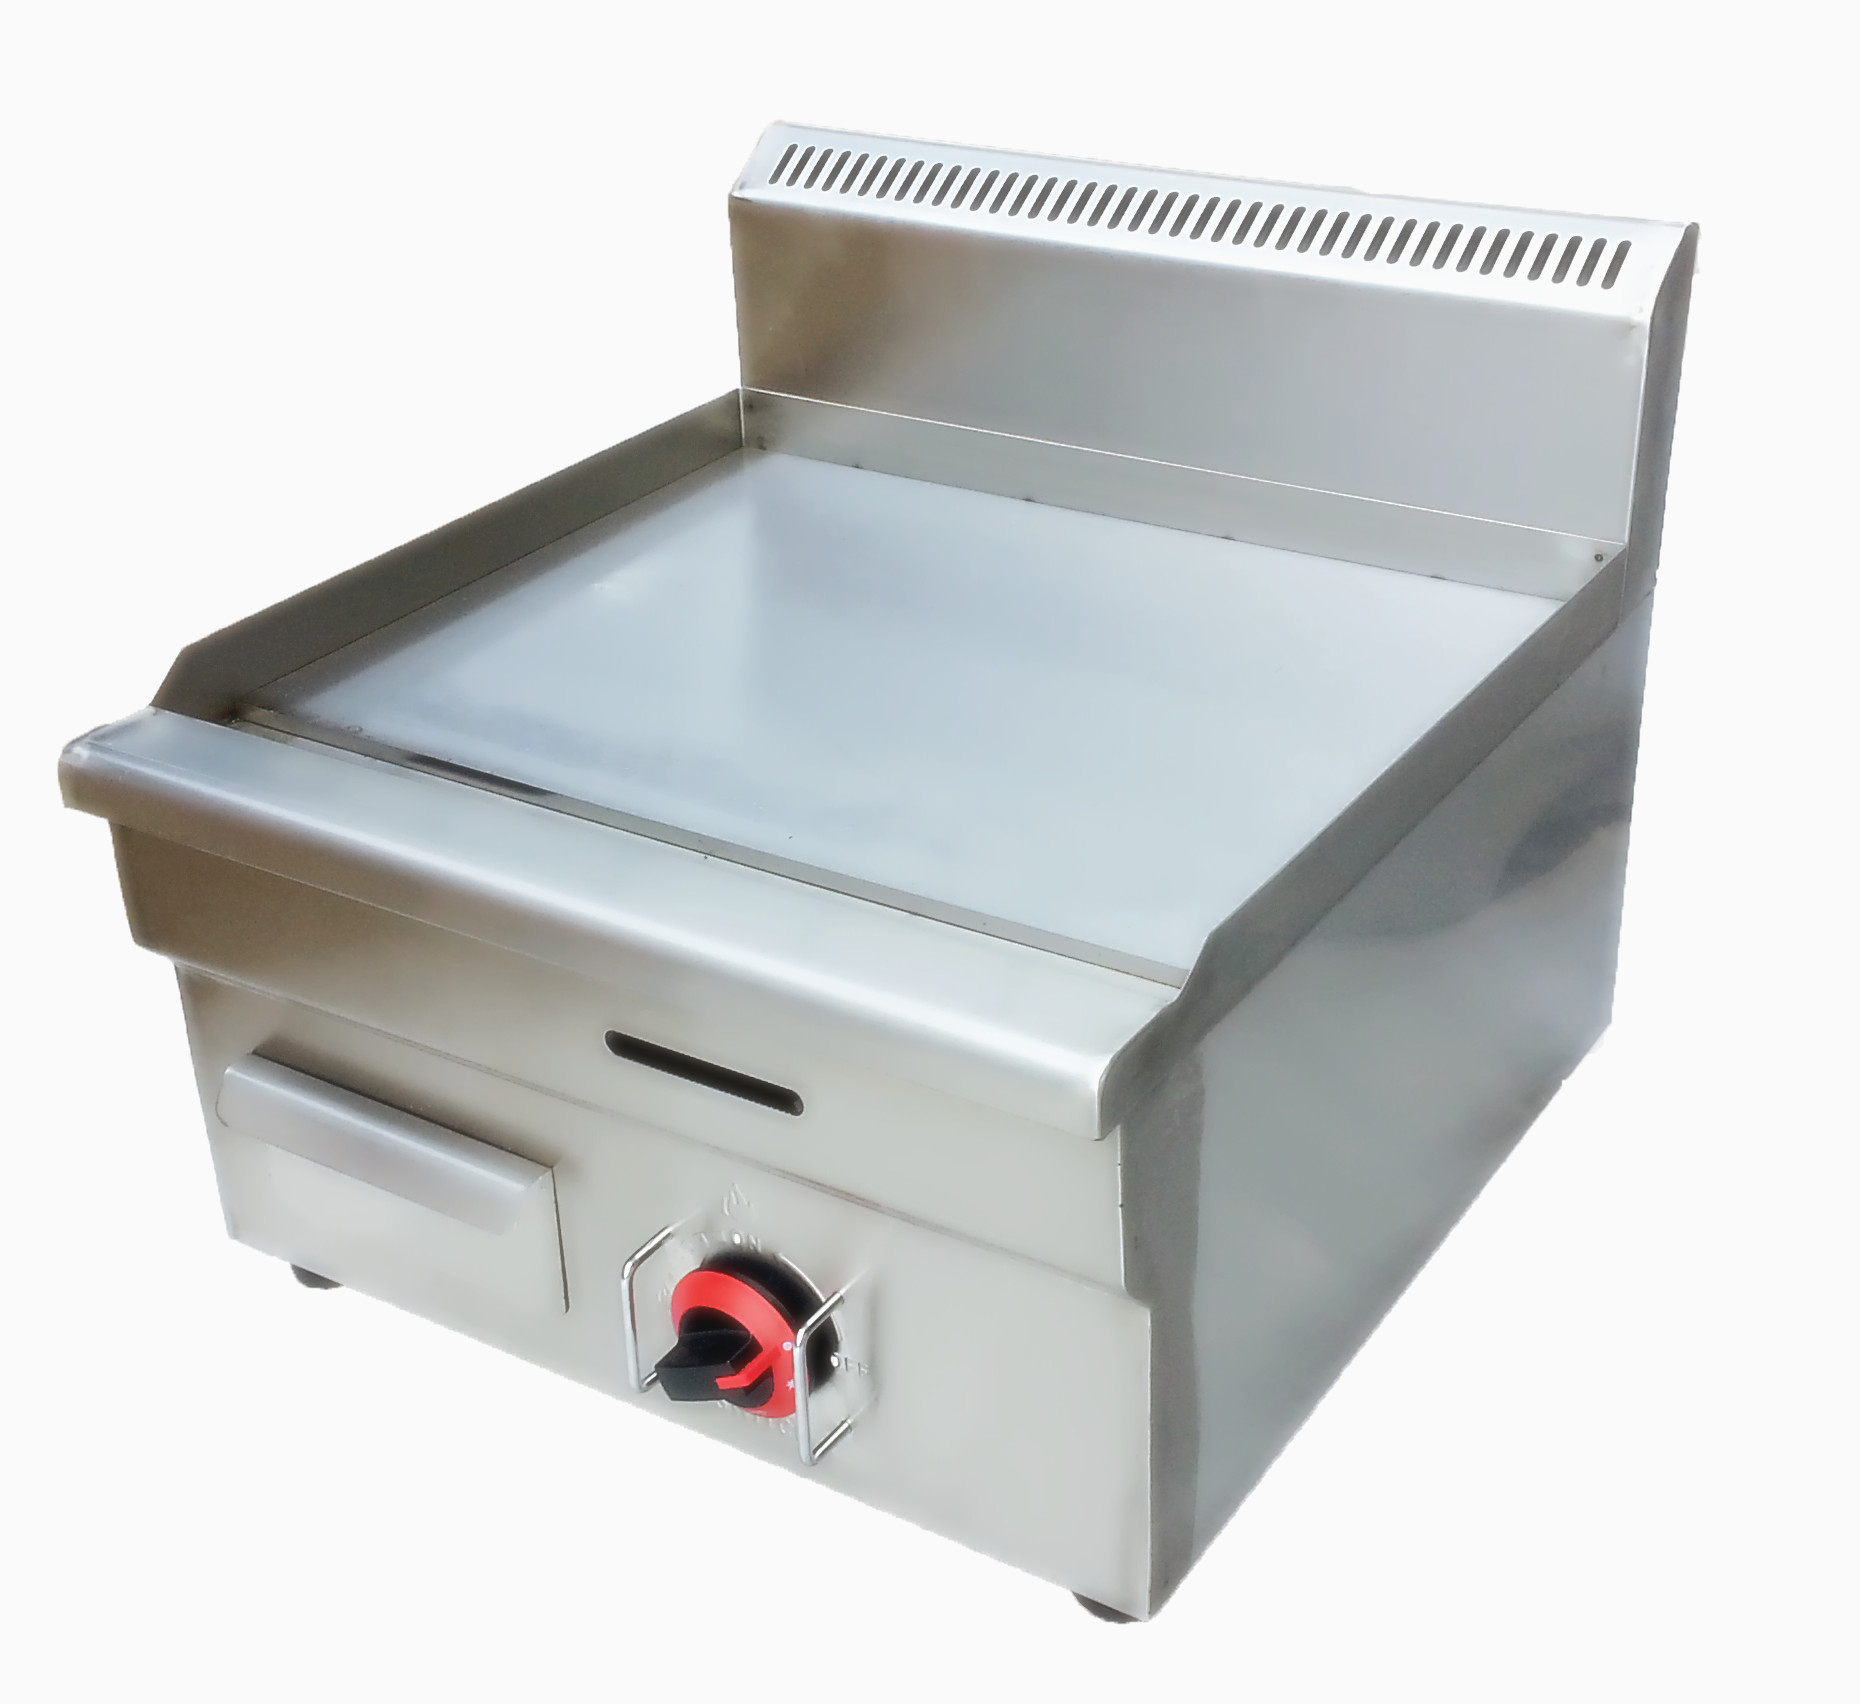 GRT-G530 Gas Grill and Griddle for Grilling Food